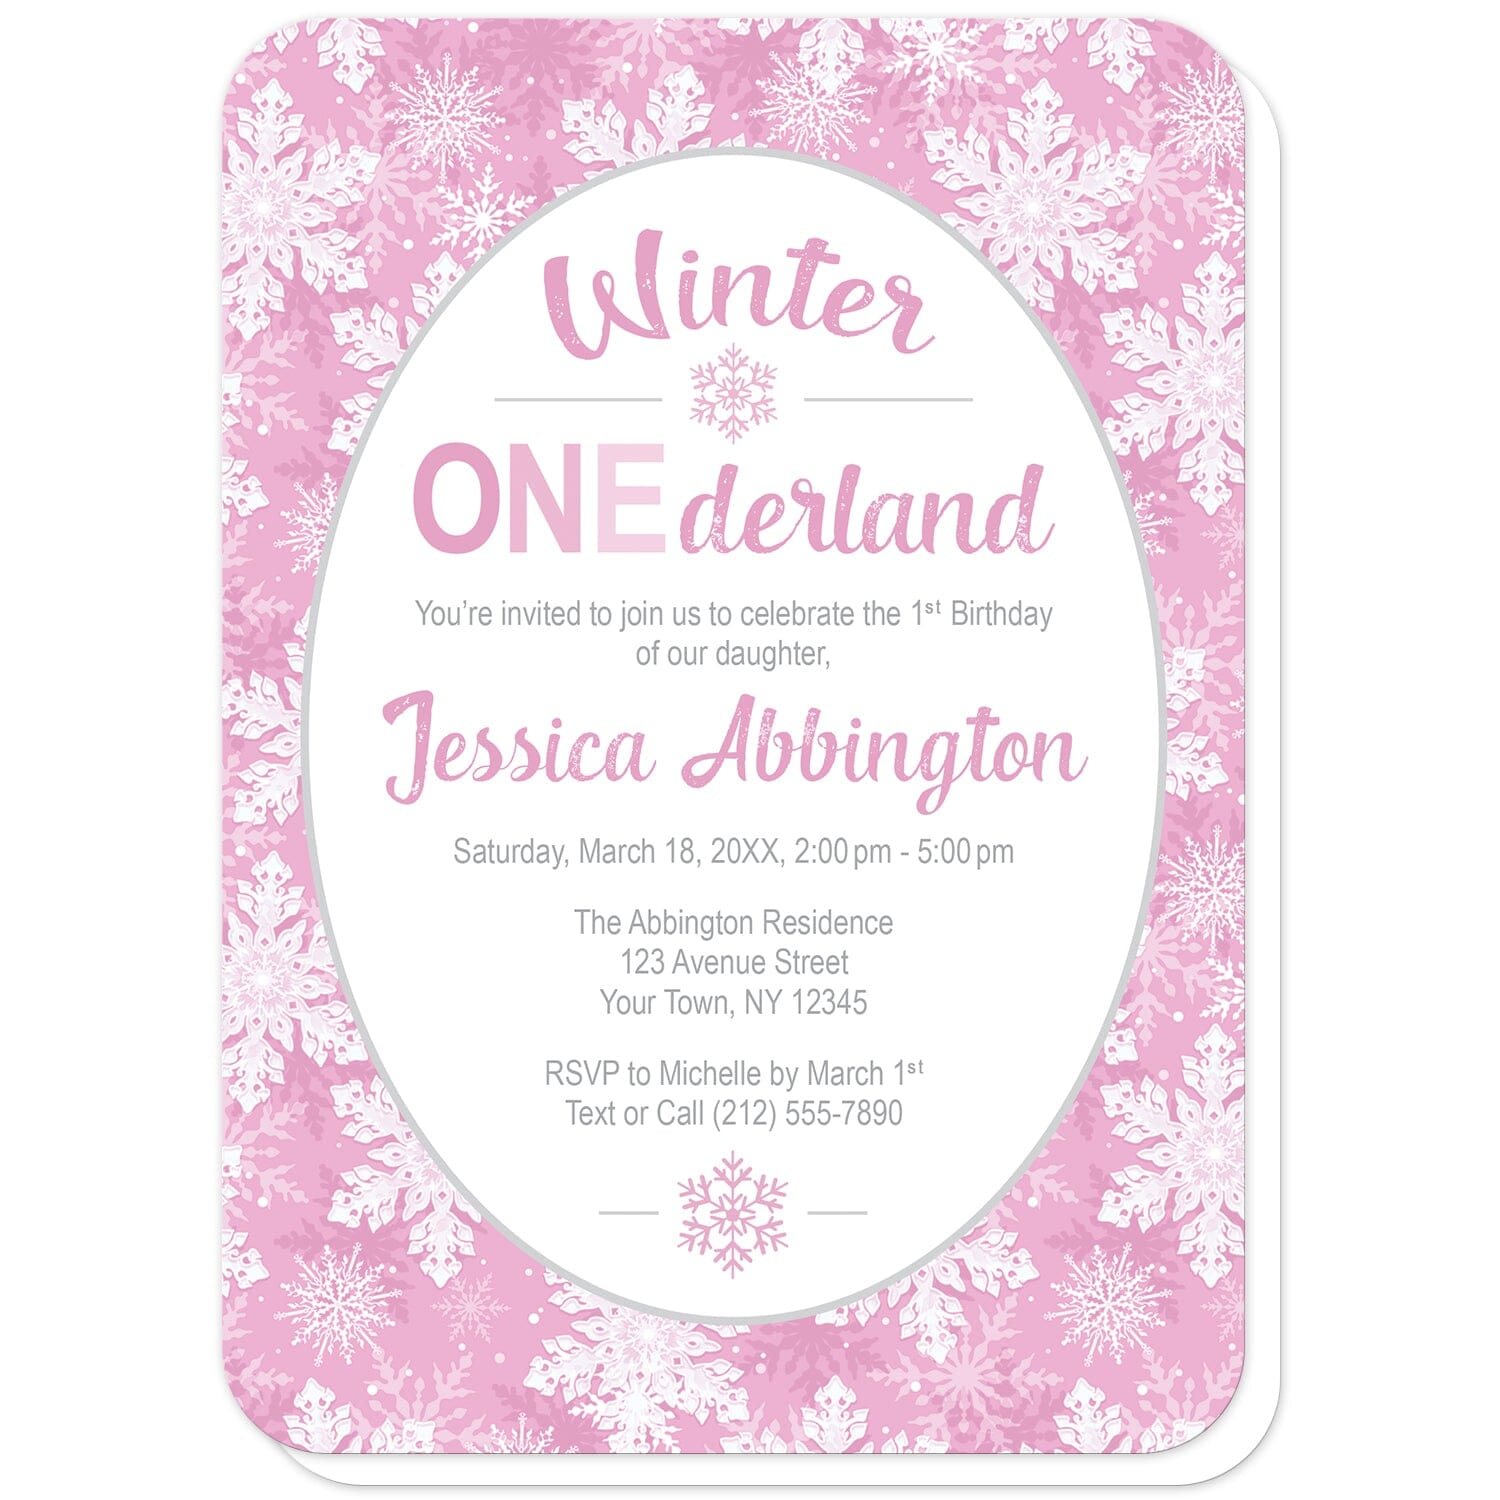 Pink Snowflake 1st Birthday Winter Onederland Invitations (with rounded corners) at Artistically Invited. Beautifully ornate pink snowflake 1st birthday Winter Onederland invitations designed with your personalized 1st birthday party details custom printed in pink and gray in a white oval frame design over a pretty pink and white snowflake pattern background.